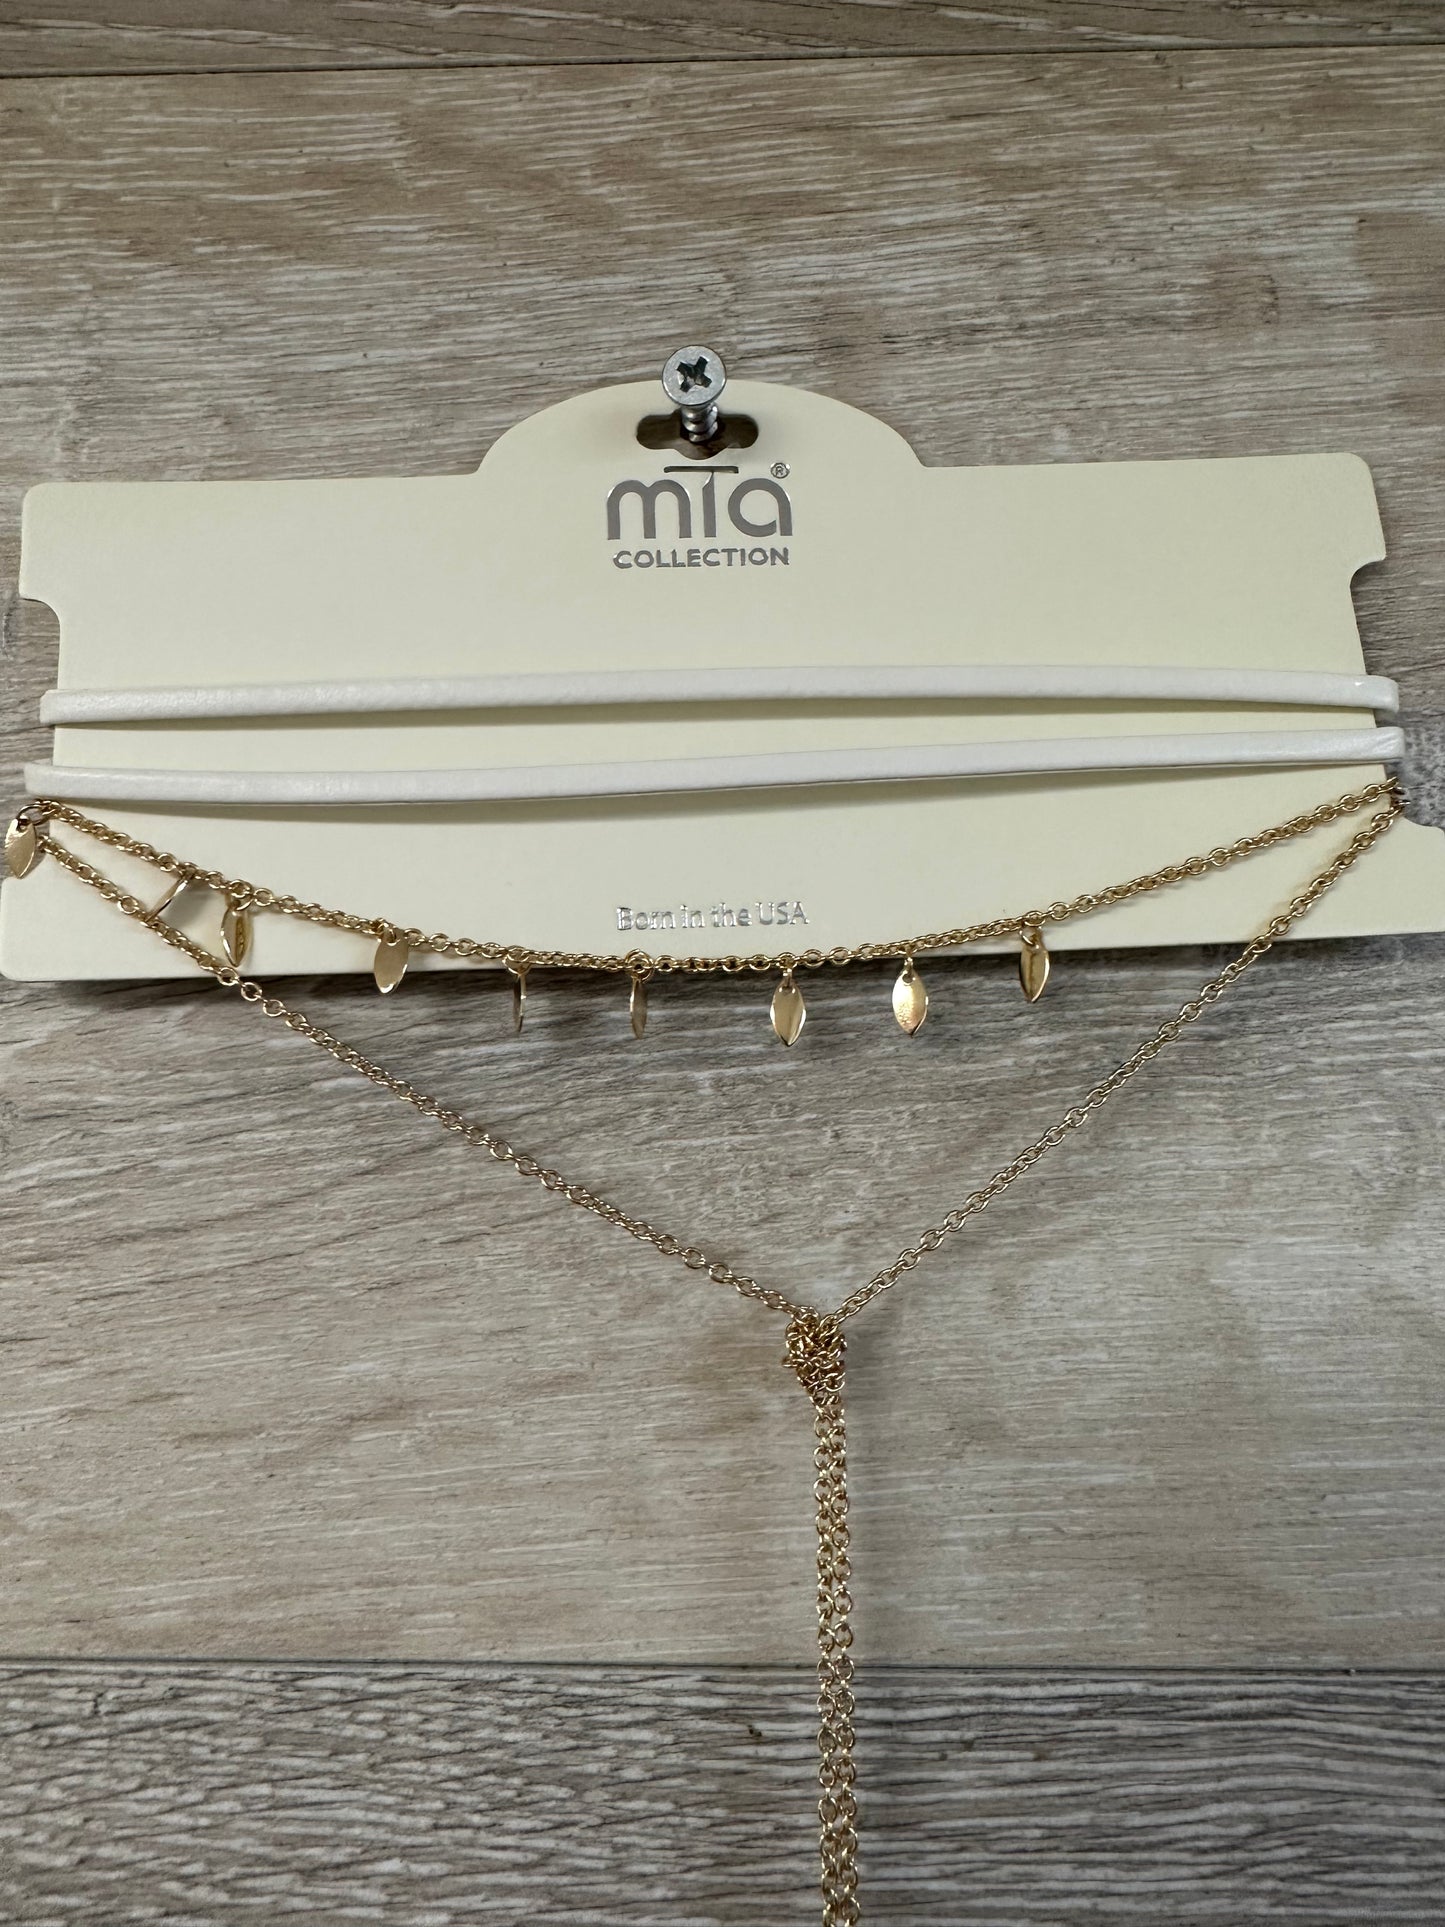 Mia collection white choker and gold necklace